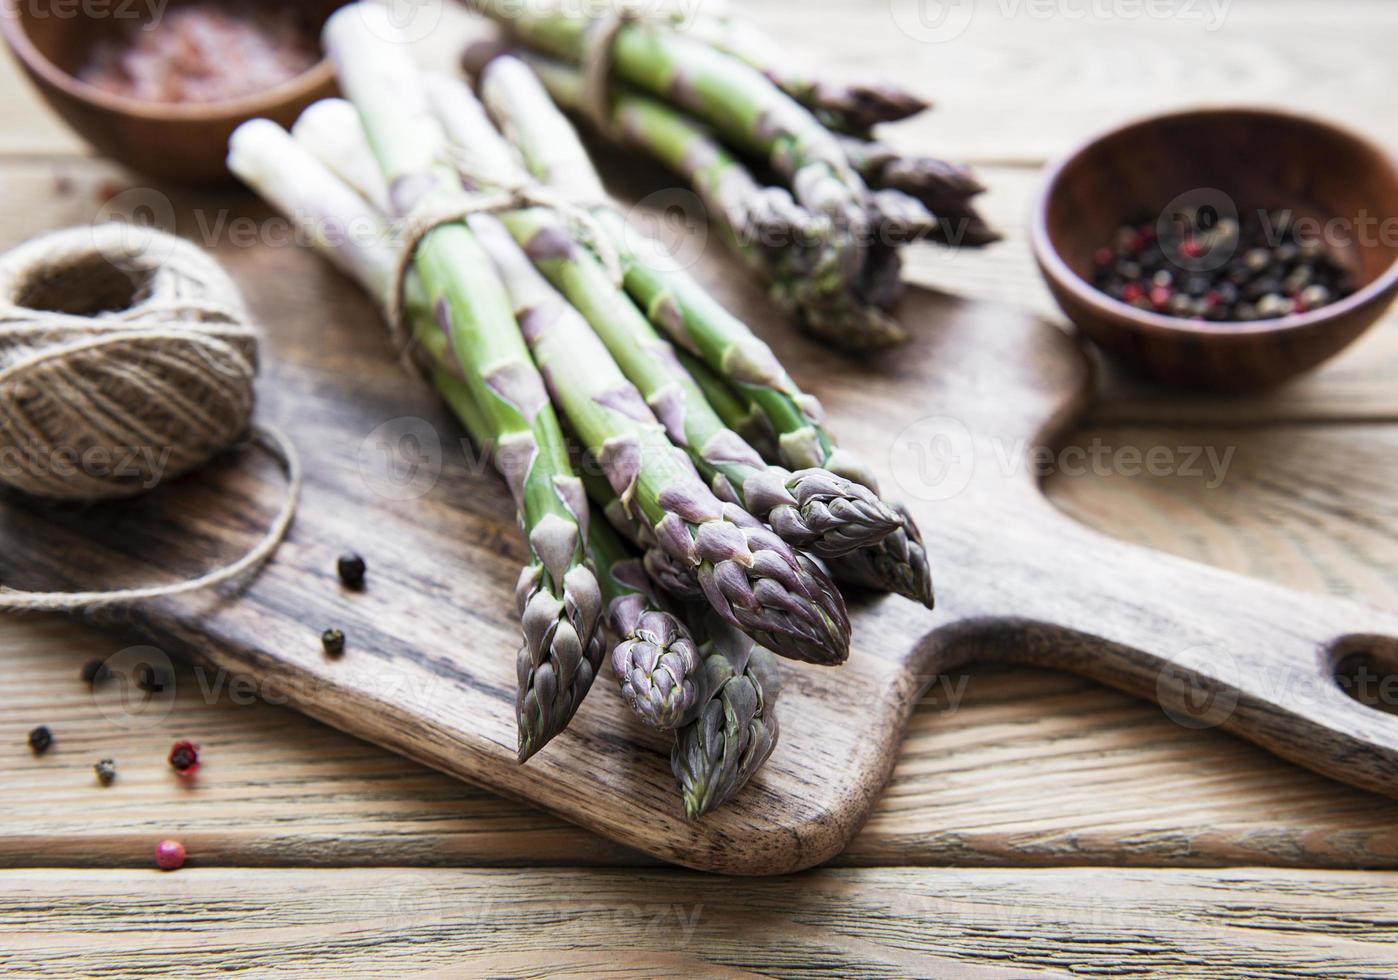 Bunches of green asparagus photo